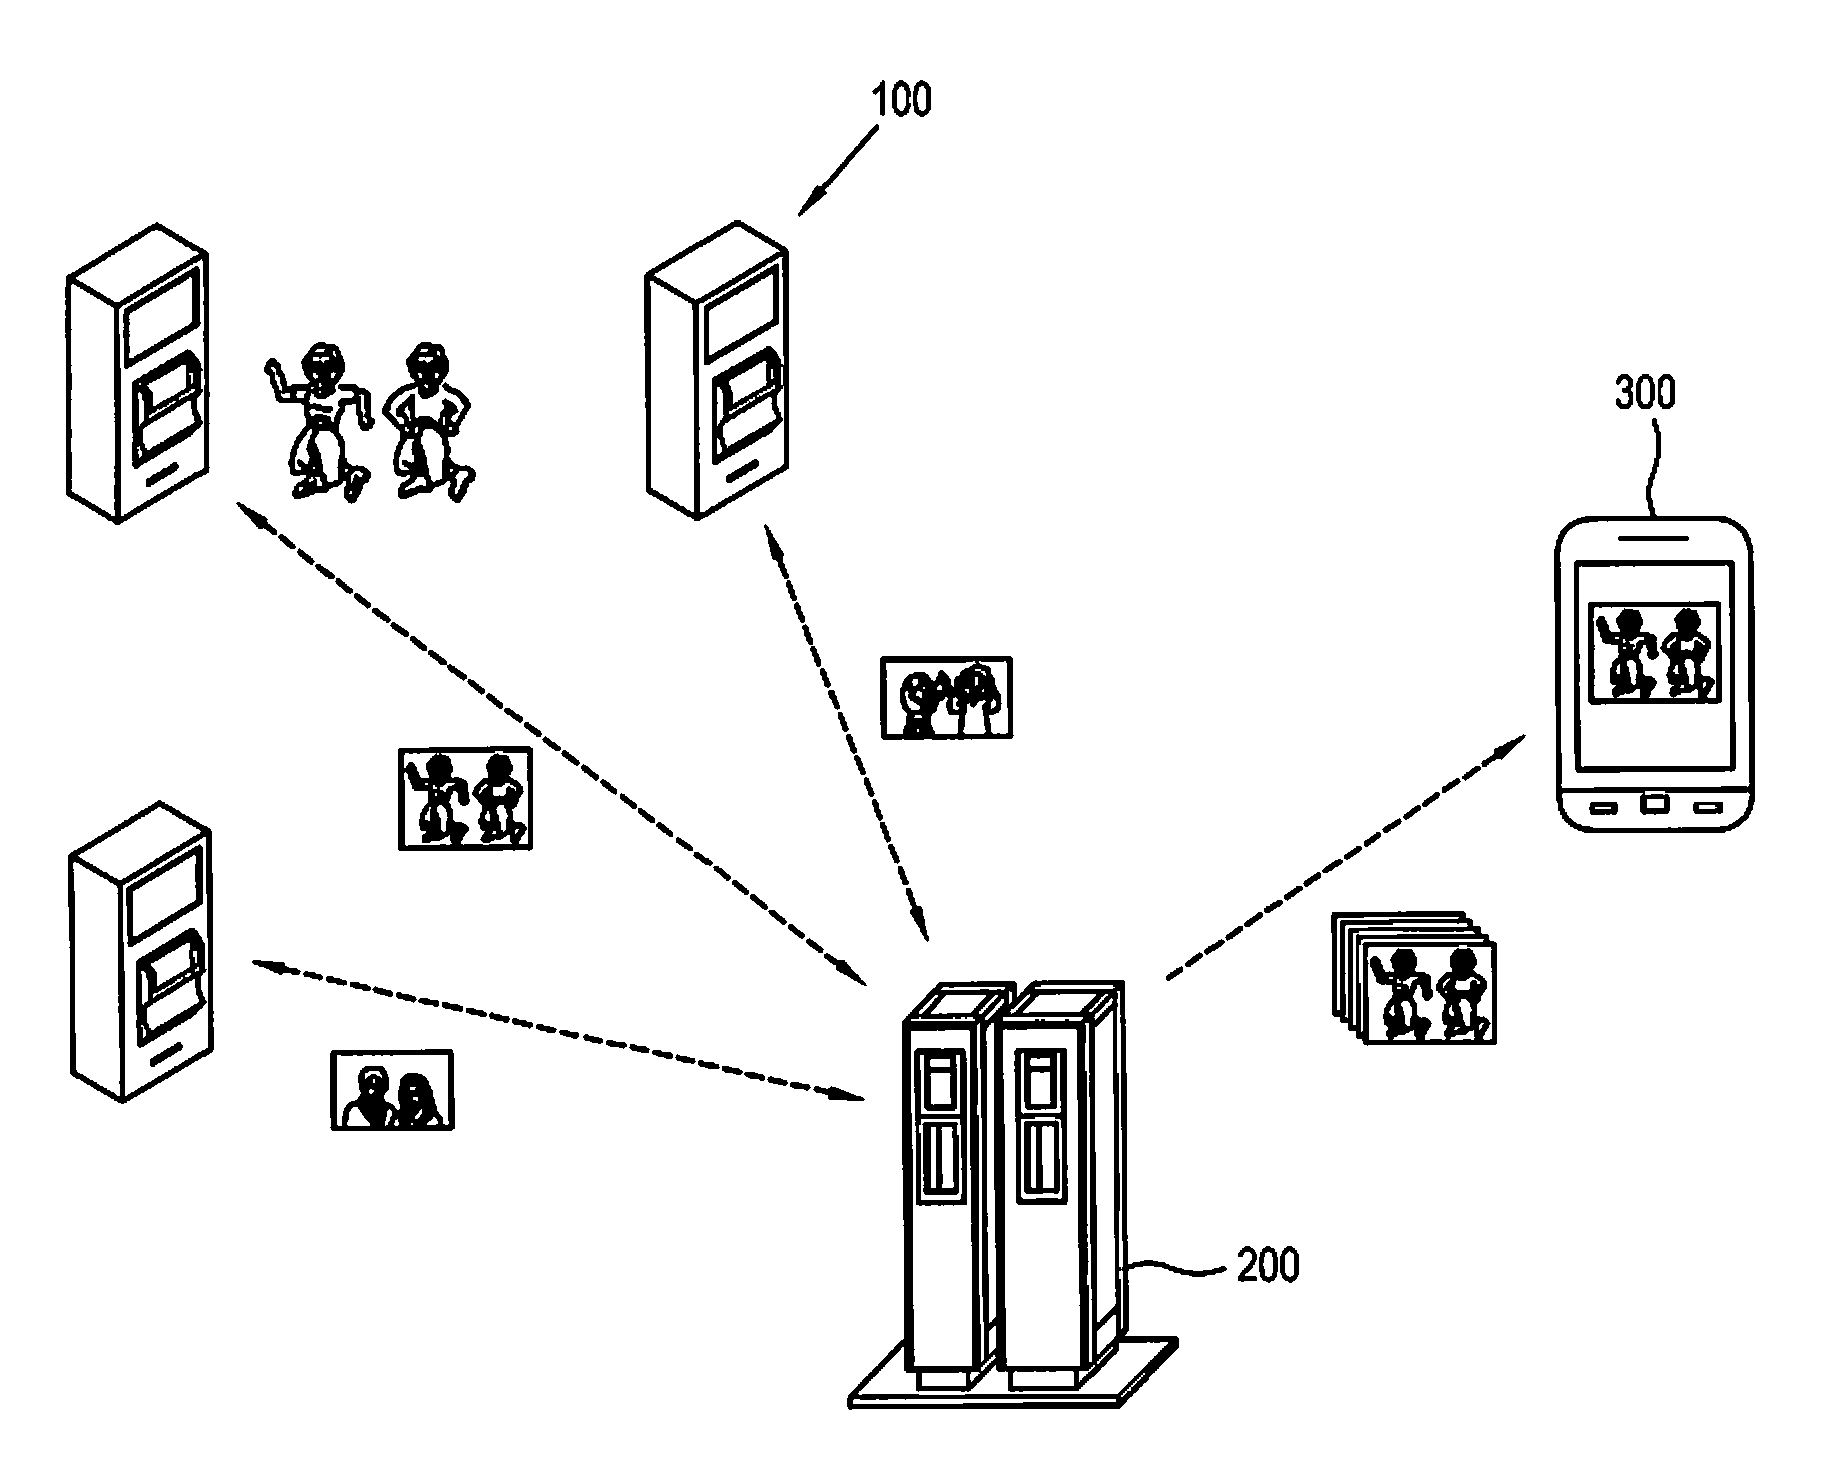 Image providing system and method